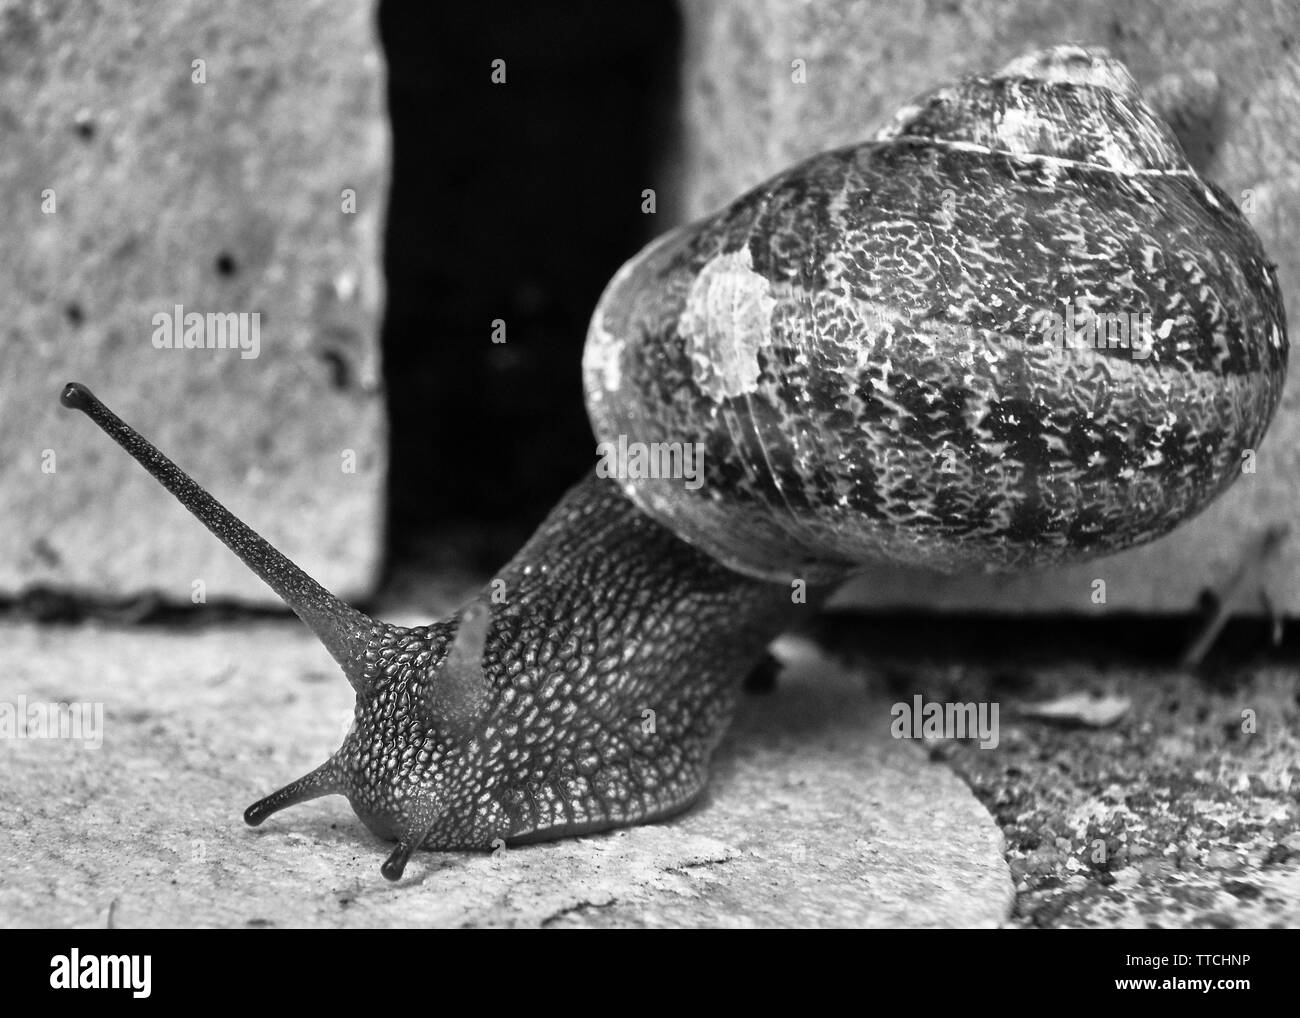 Close up photo of a common garden snail crawling on a stone brick Stock Photo